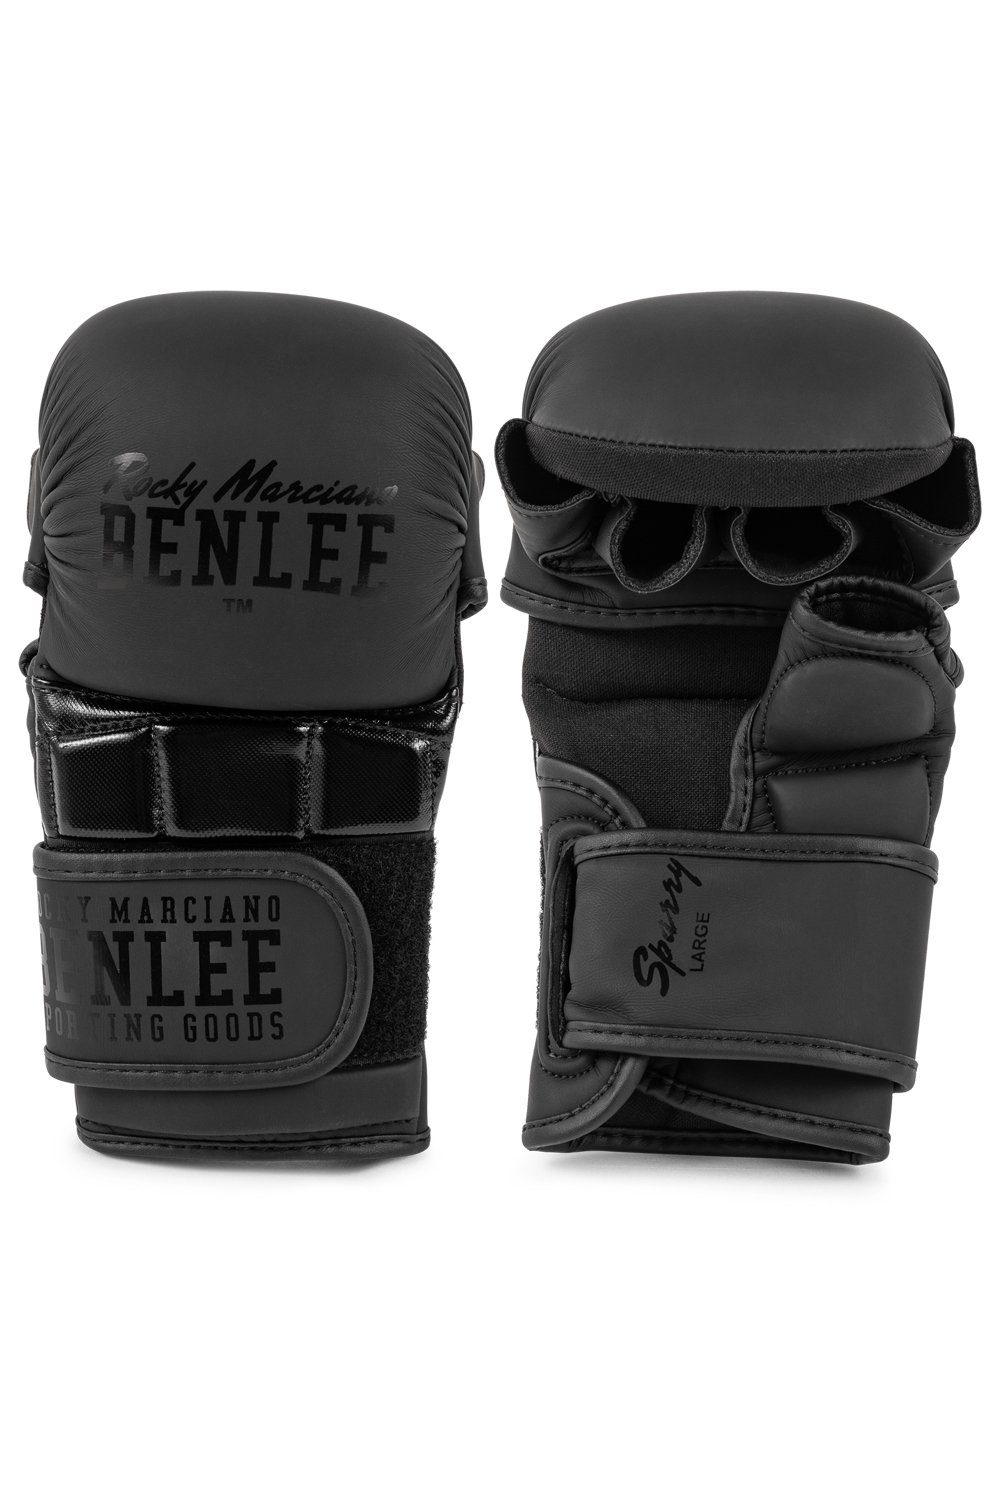 Rocky SPARRY Marciano Boxhandschuhe Benlee